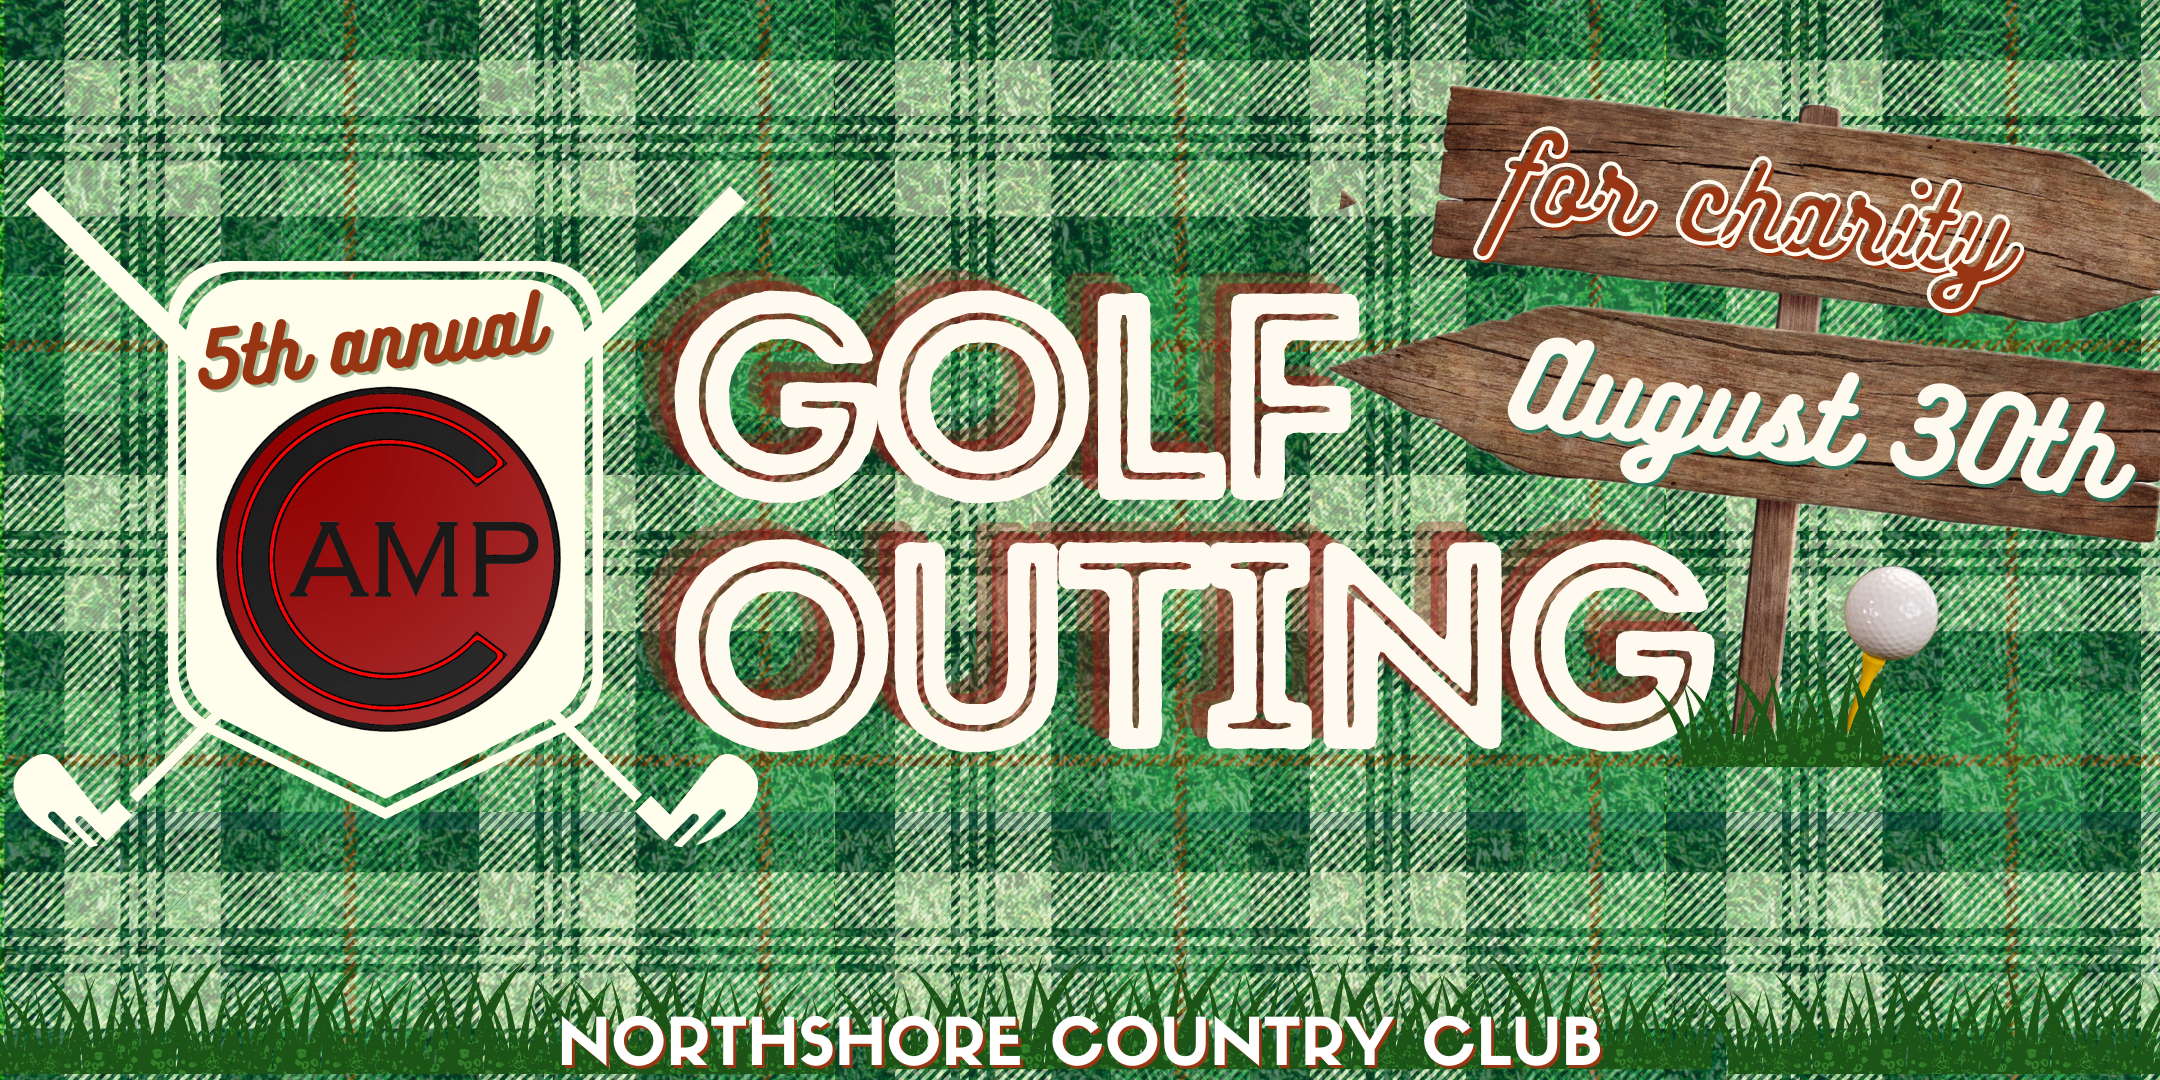 5th Annual Camp Golf Outing